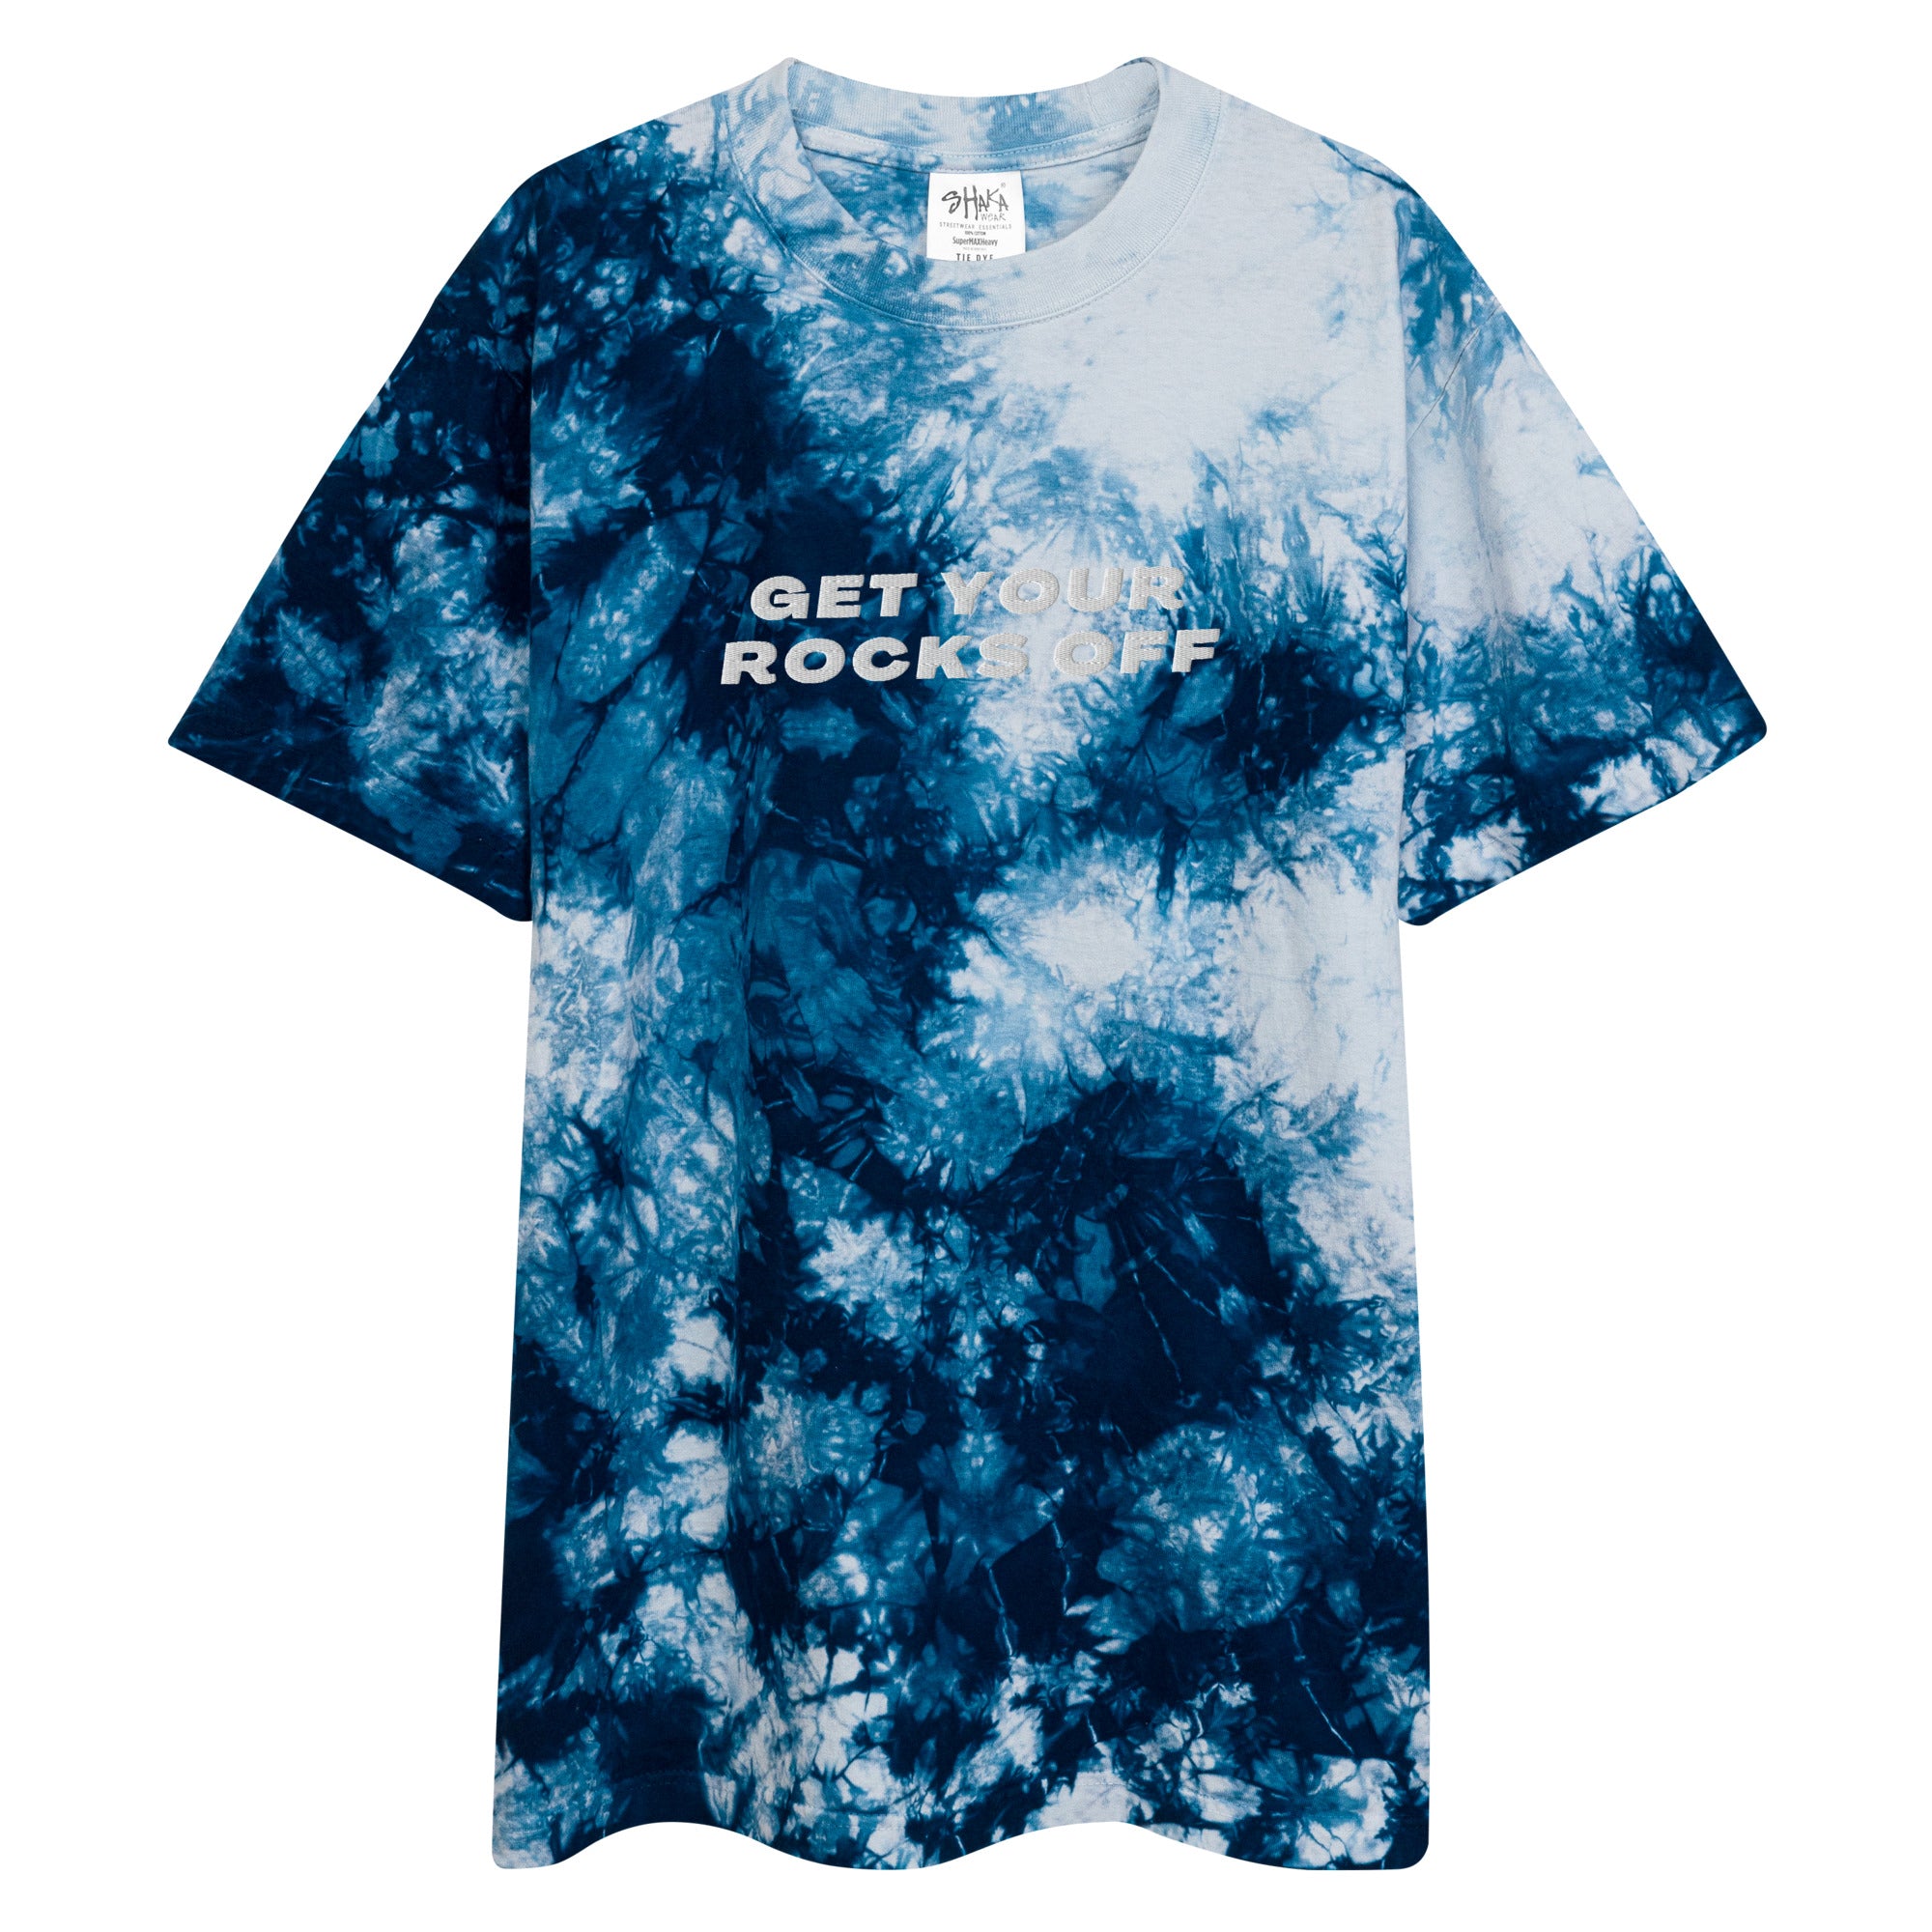 Get Your Rocks Off Oversized Tie-Dye T-Shirt (White Embroidery)